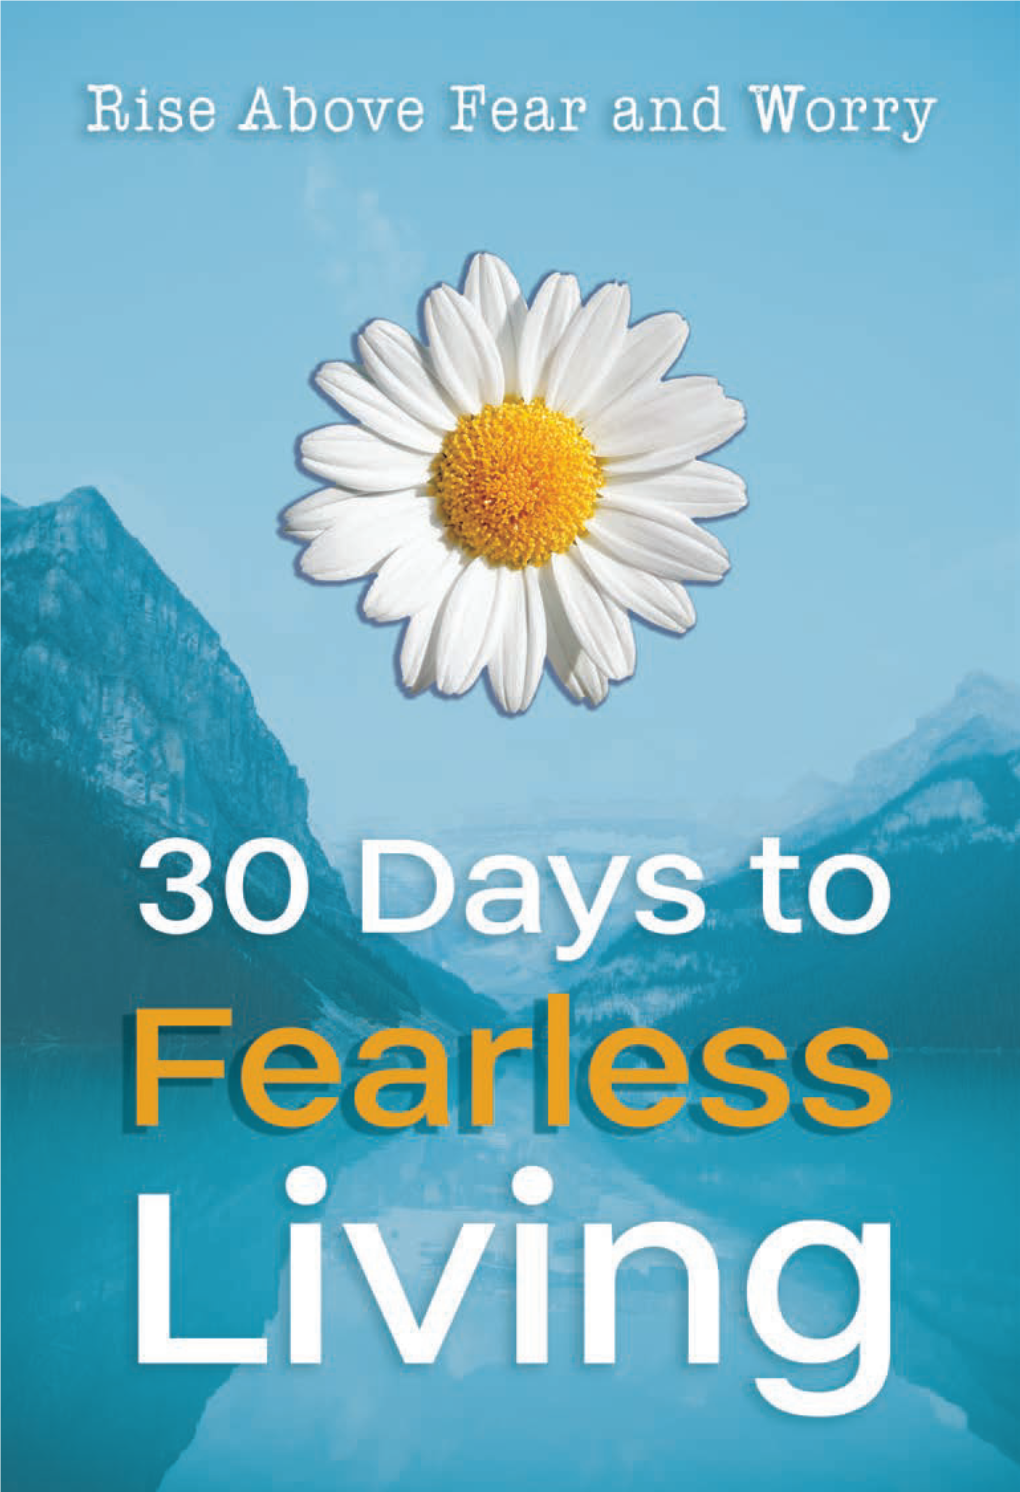 30 Days to Fearless Living